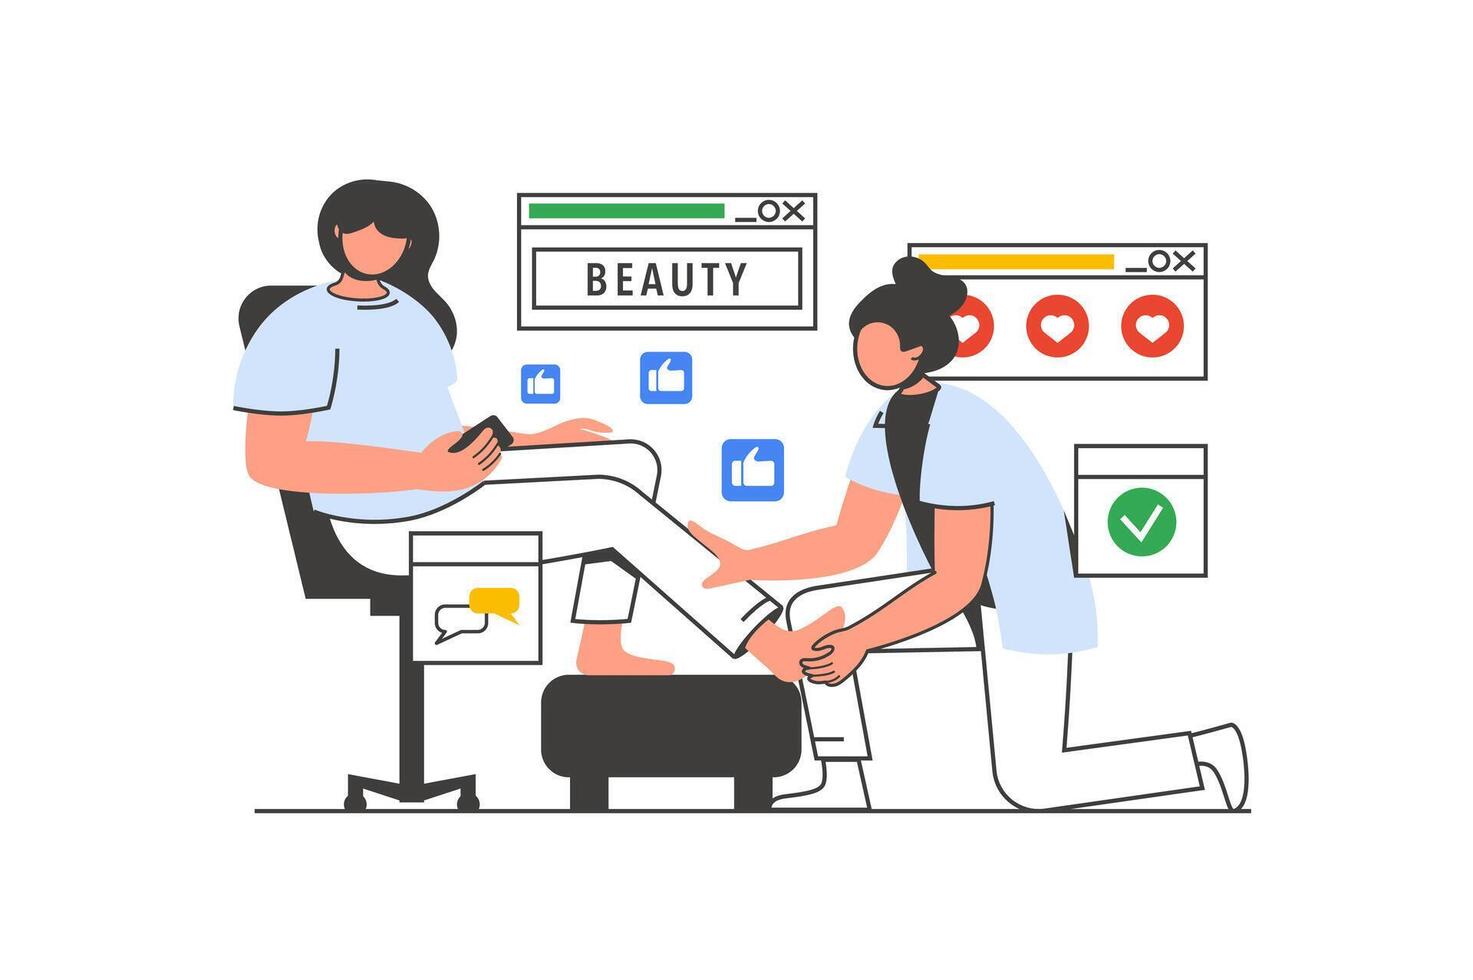 Beauty salon outline web concept with character scene. Woman getting procedure of foot massage in spa. People situation in flat line design. Vector illustration for social media marketing material.